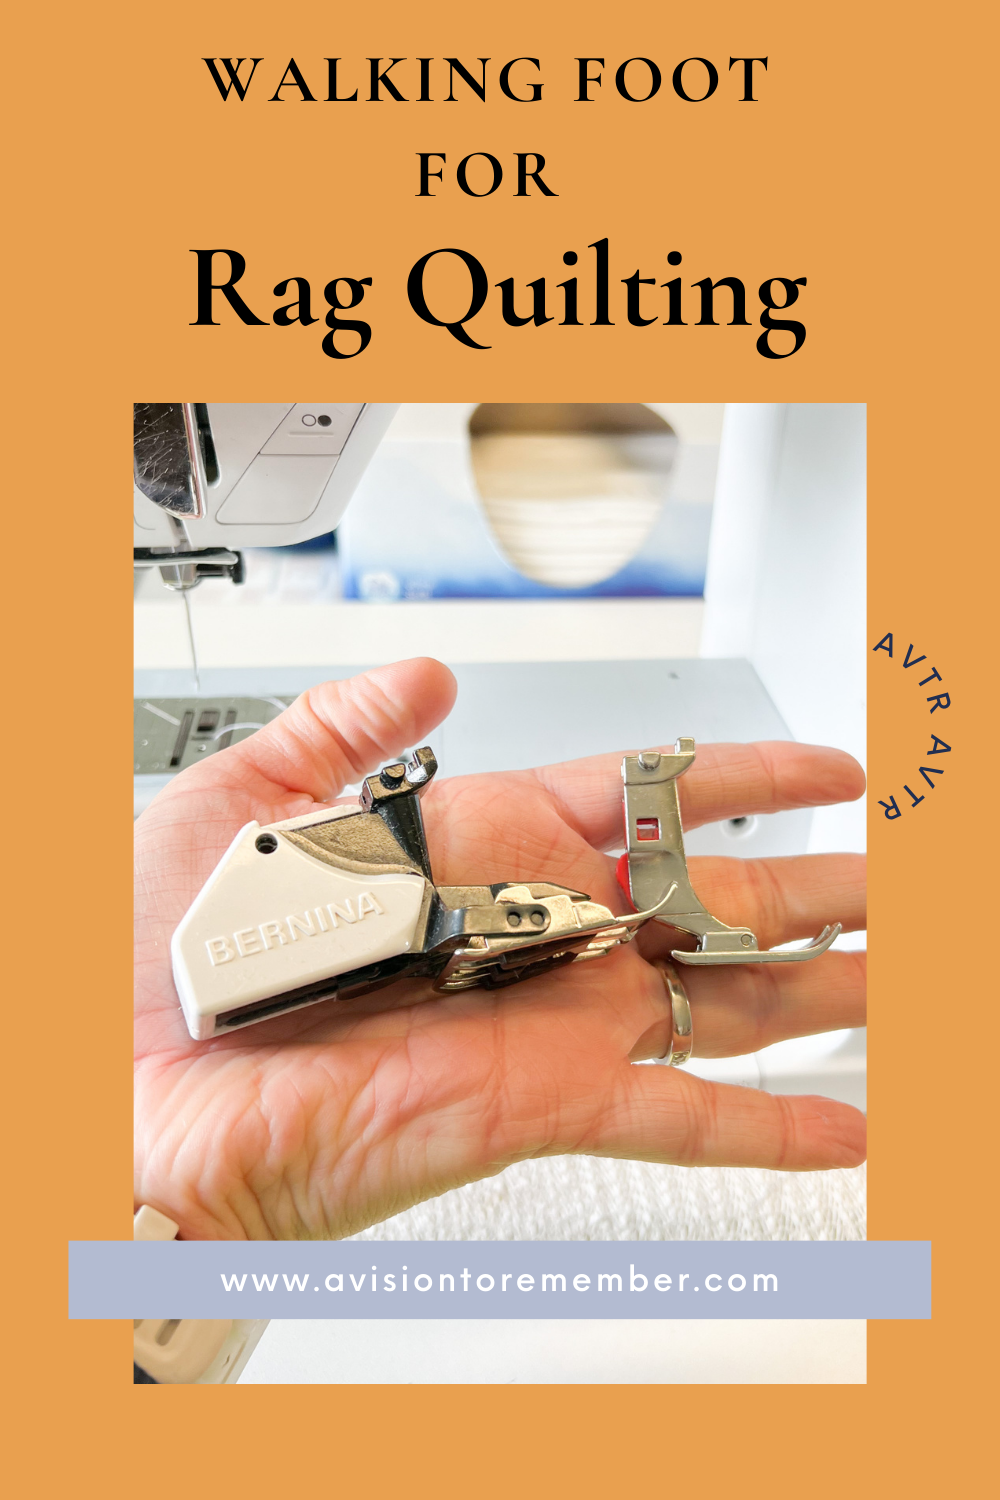 A Vision to Remember All Things Handmade Blog: Should You Use a Walking Foot  to Sew a Rag Quilt?